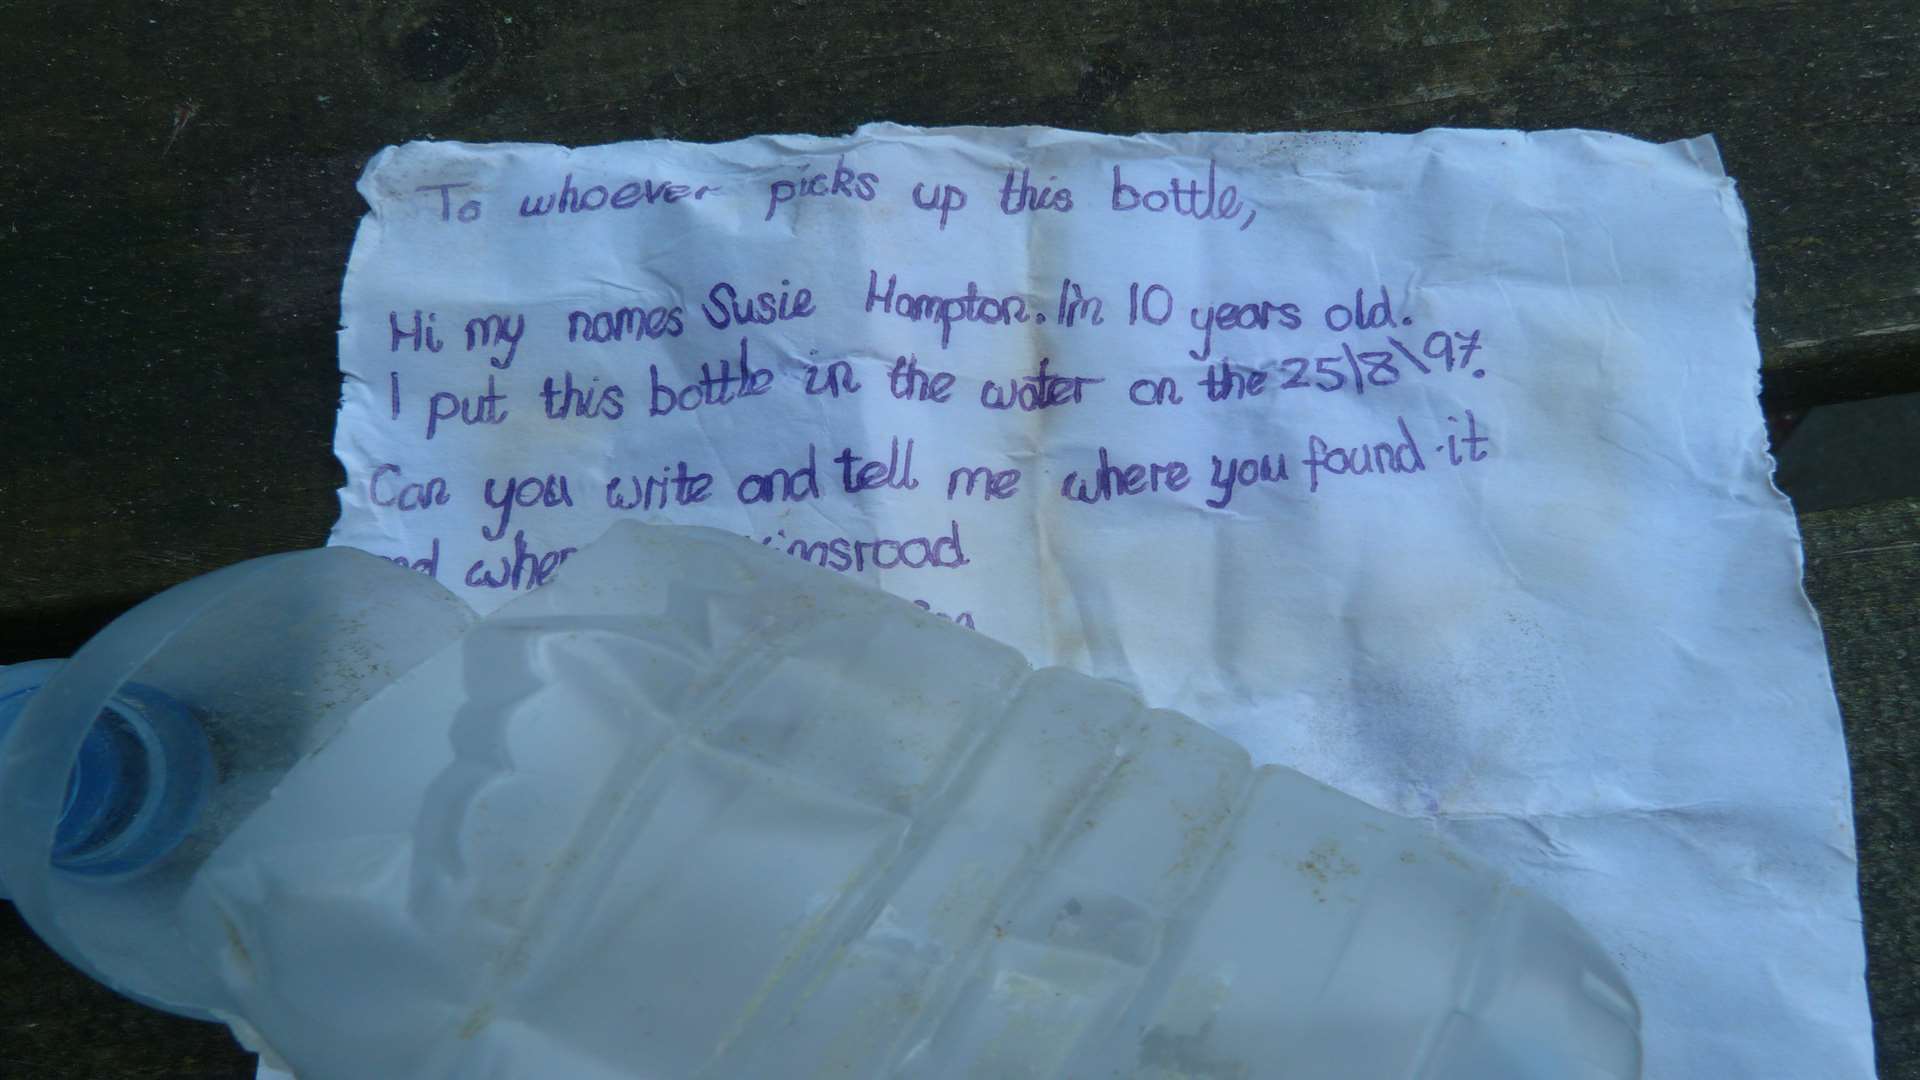 The letter was sent by Susie Hampton, who was aged 10 at the time.